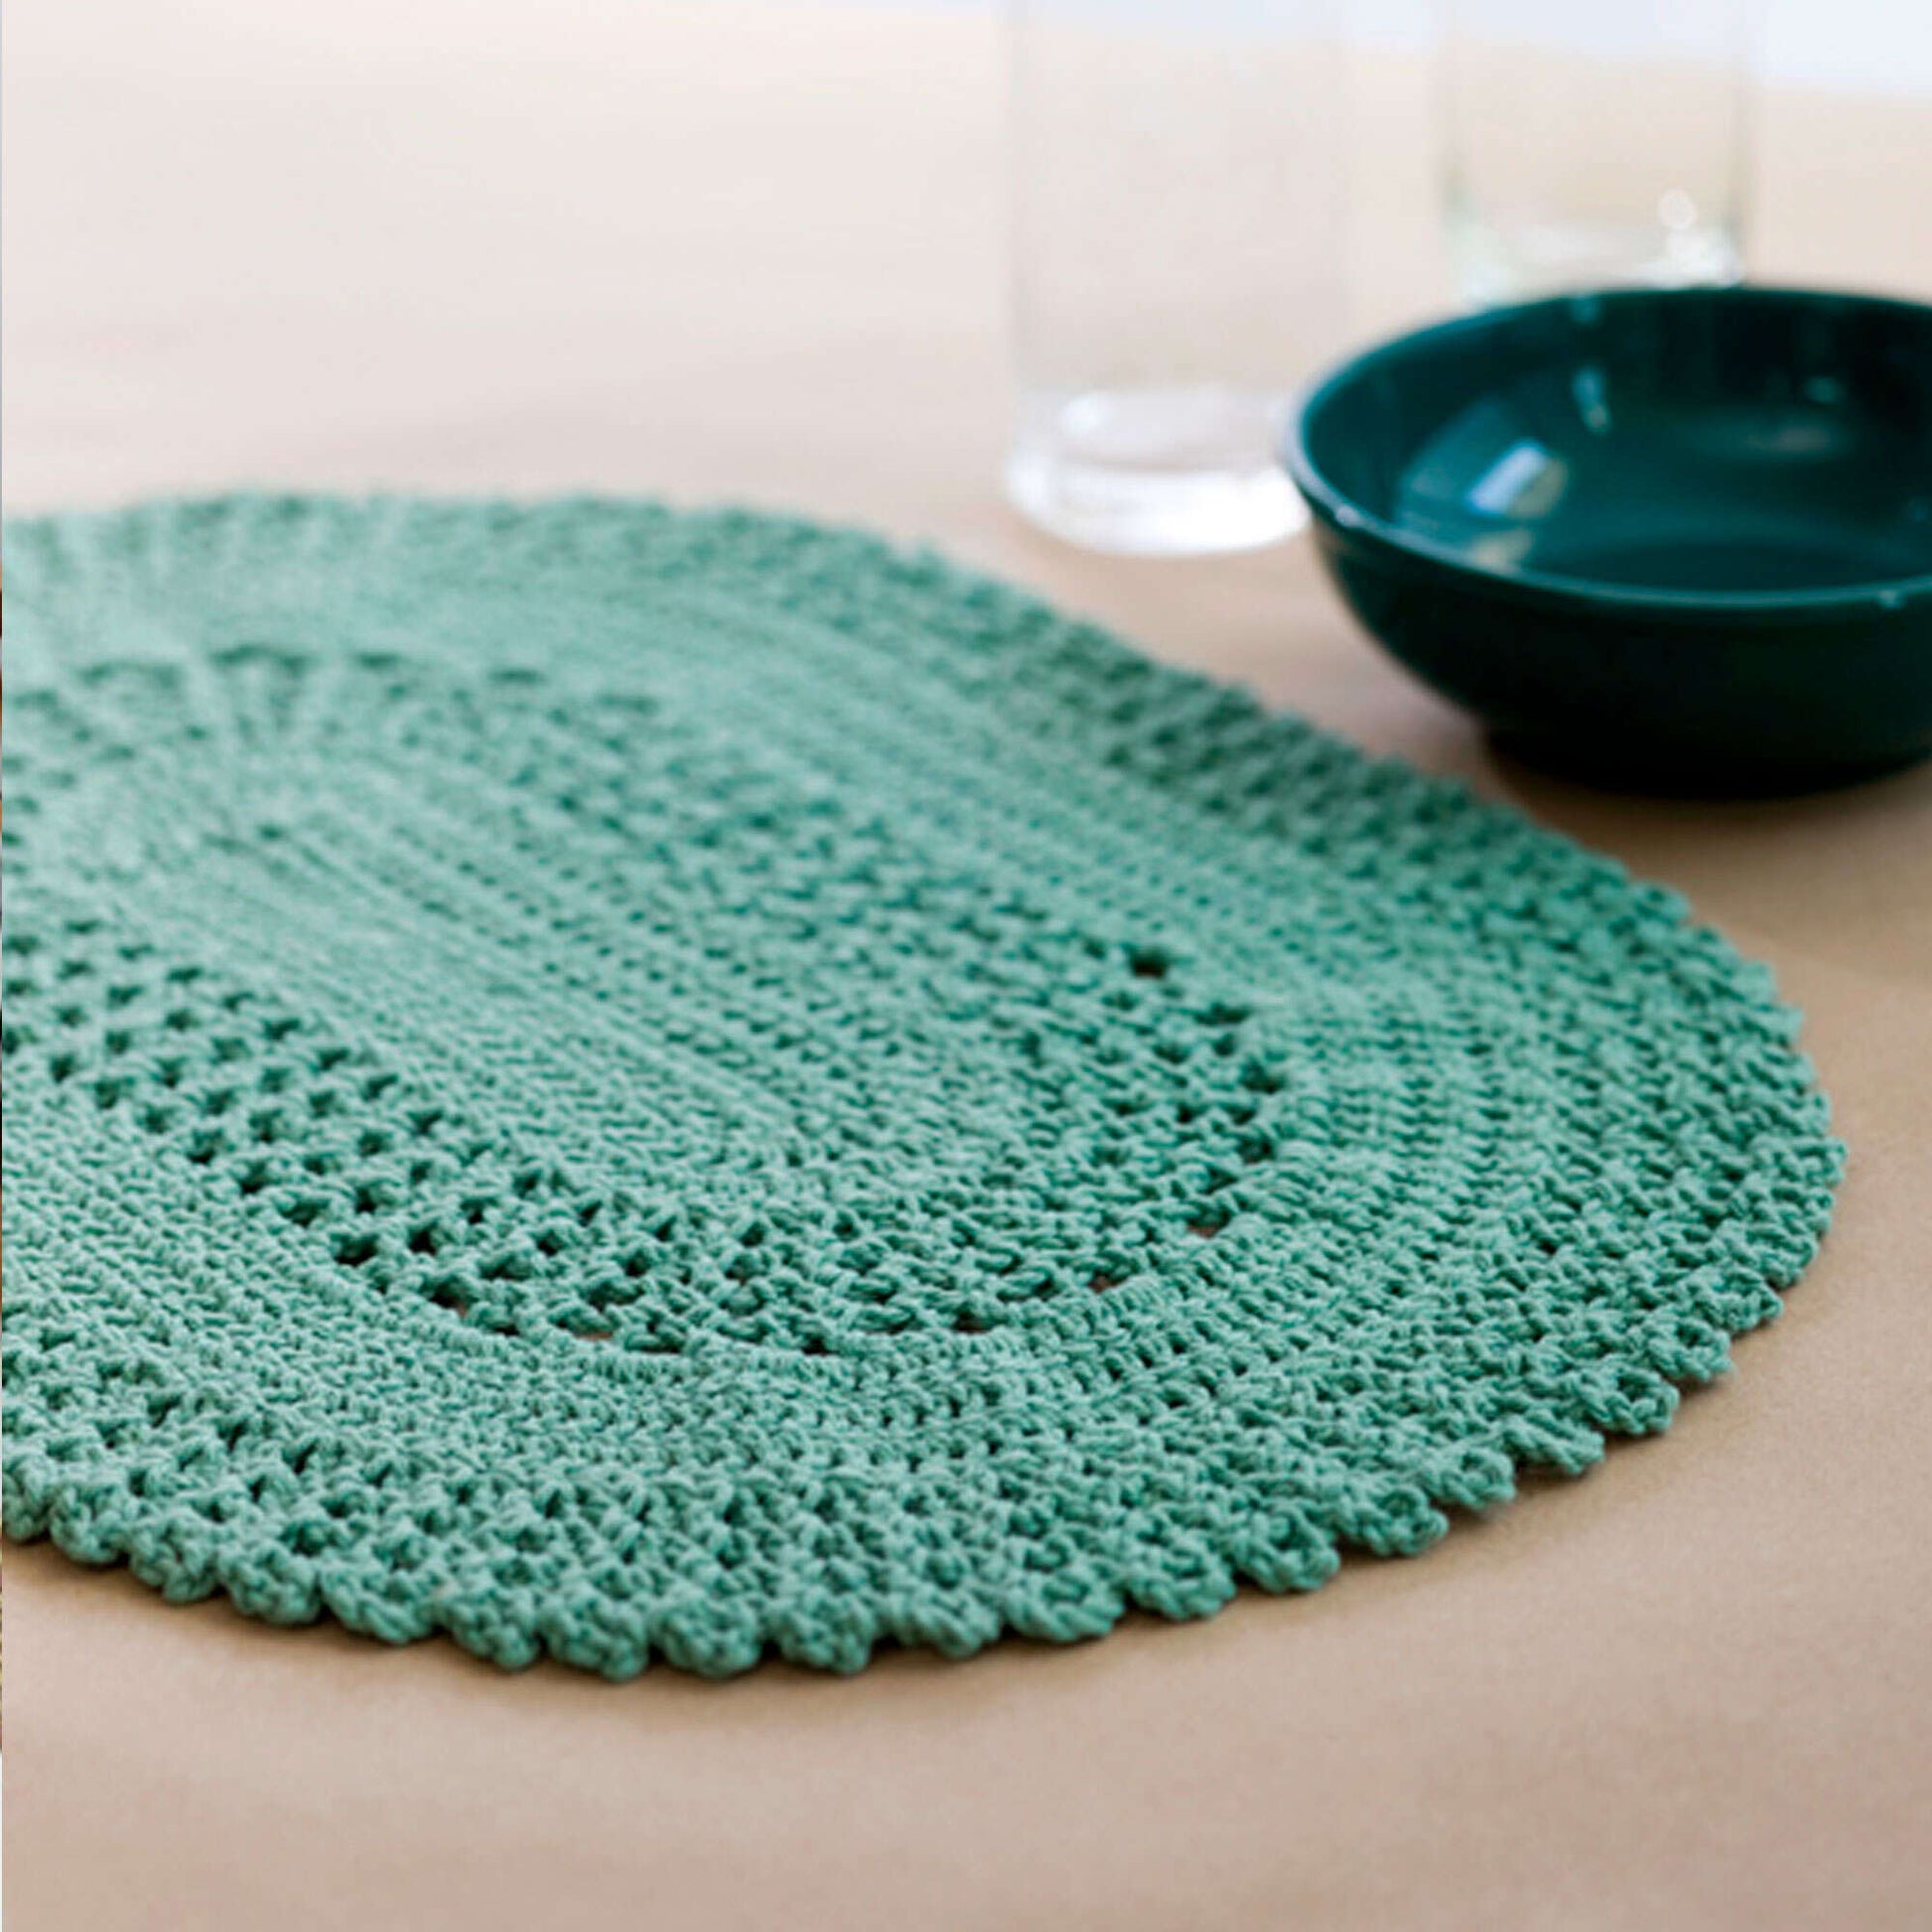 Free Red Heart Table Lace Placemat Crochet Pattern